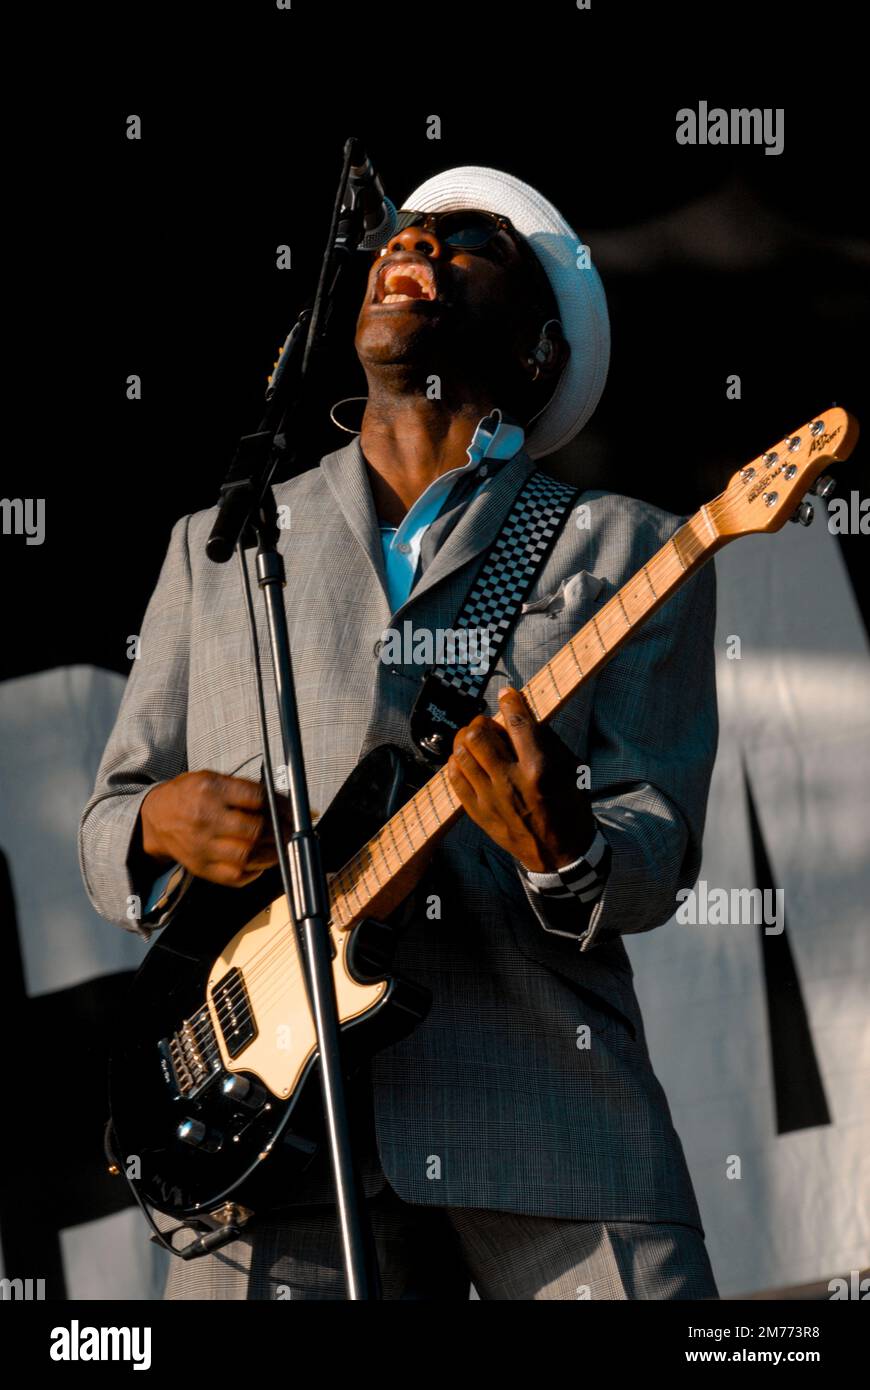 Lynval Golding - The Specials, V2008, Hylands Park, Chelmsford, Essex, Britain - 22 August 2009 Stock Photo